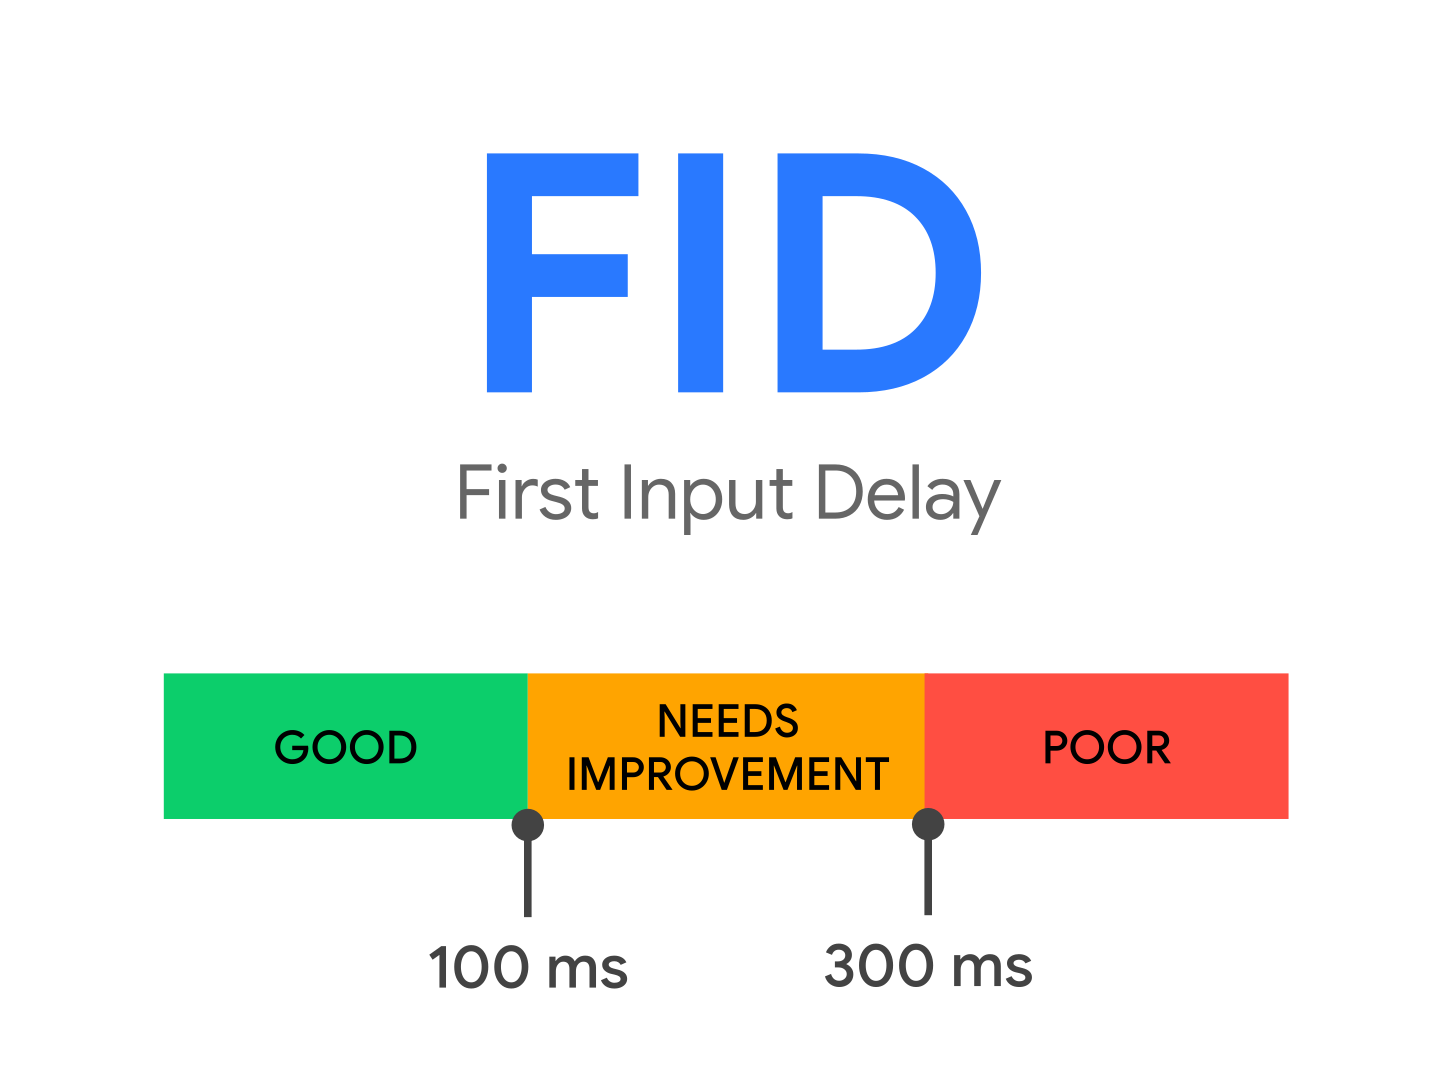 Good FID values are 2.5 seconds or less, poor values are greater than 4.0 seconds, and anything in between needs improvement